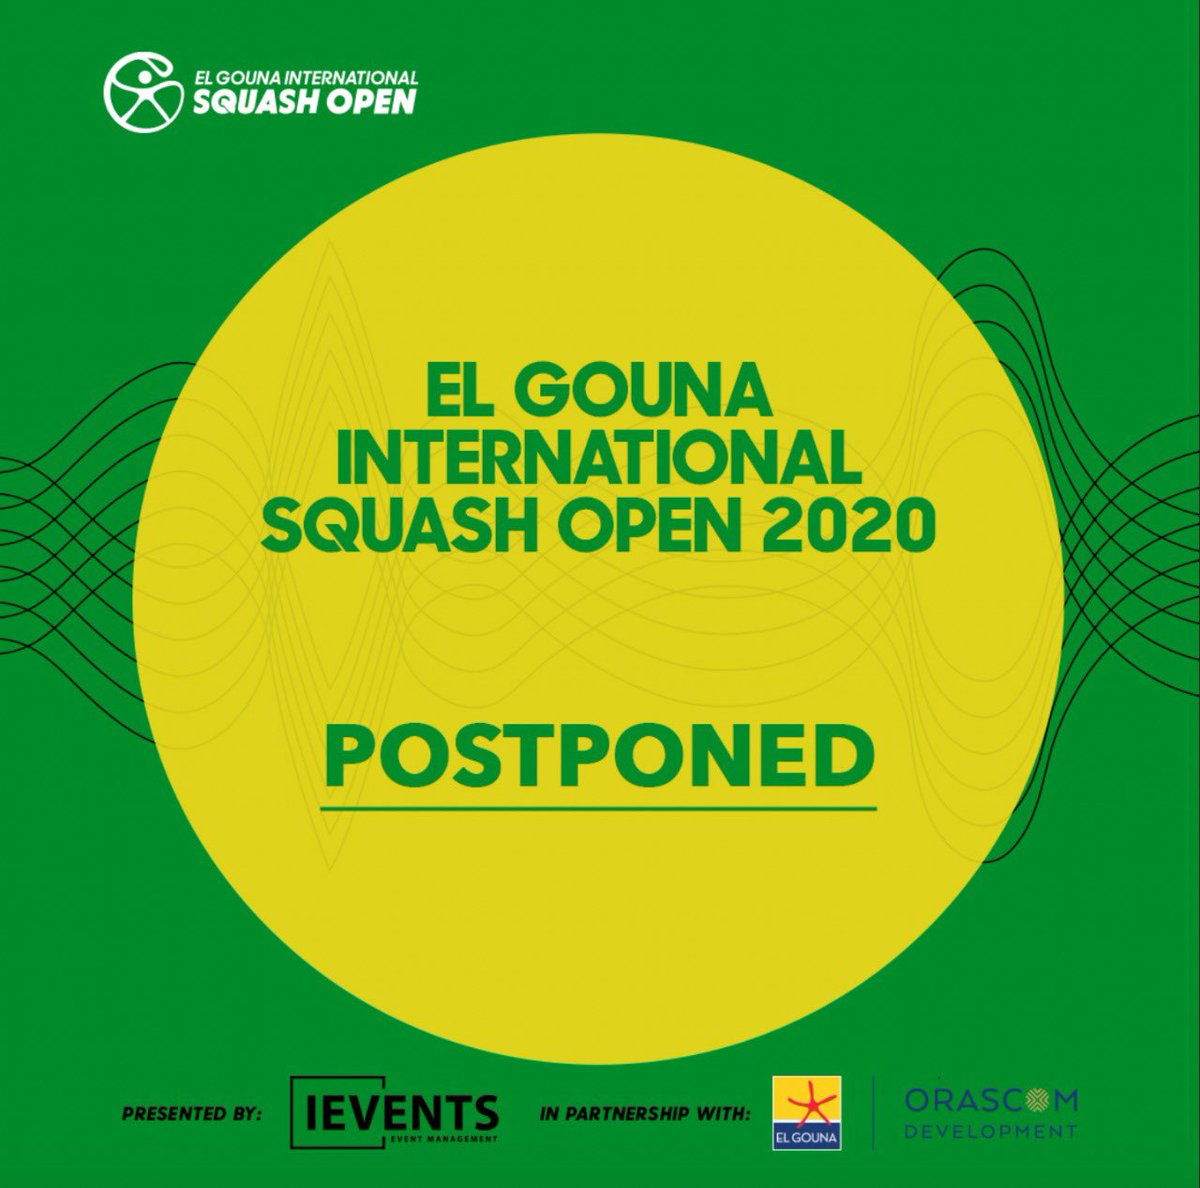 Due to the coronavirus outbreak and in alignment with the Professional Squash Association, we sadly announce that the upcoming #ElGounaSquashOpen, will be postponed. This measure is to ensure the safety of the players & fans.
Check back here for updates; meanwhile, stay safe!